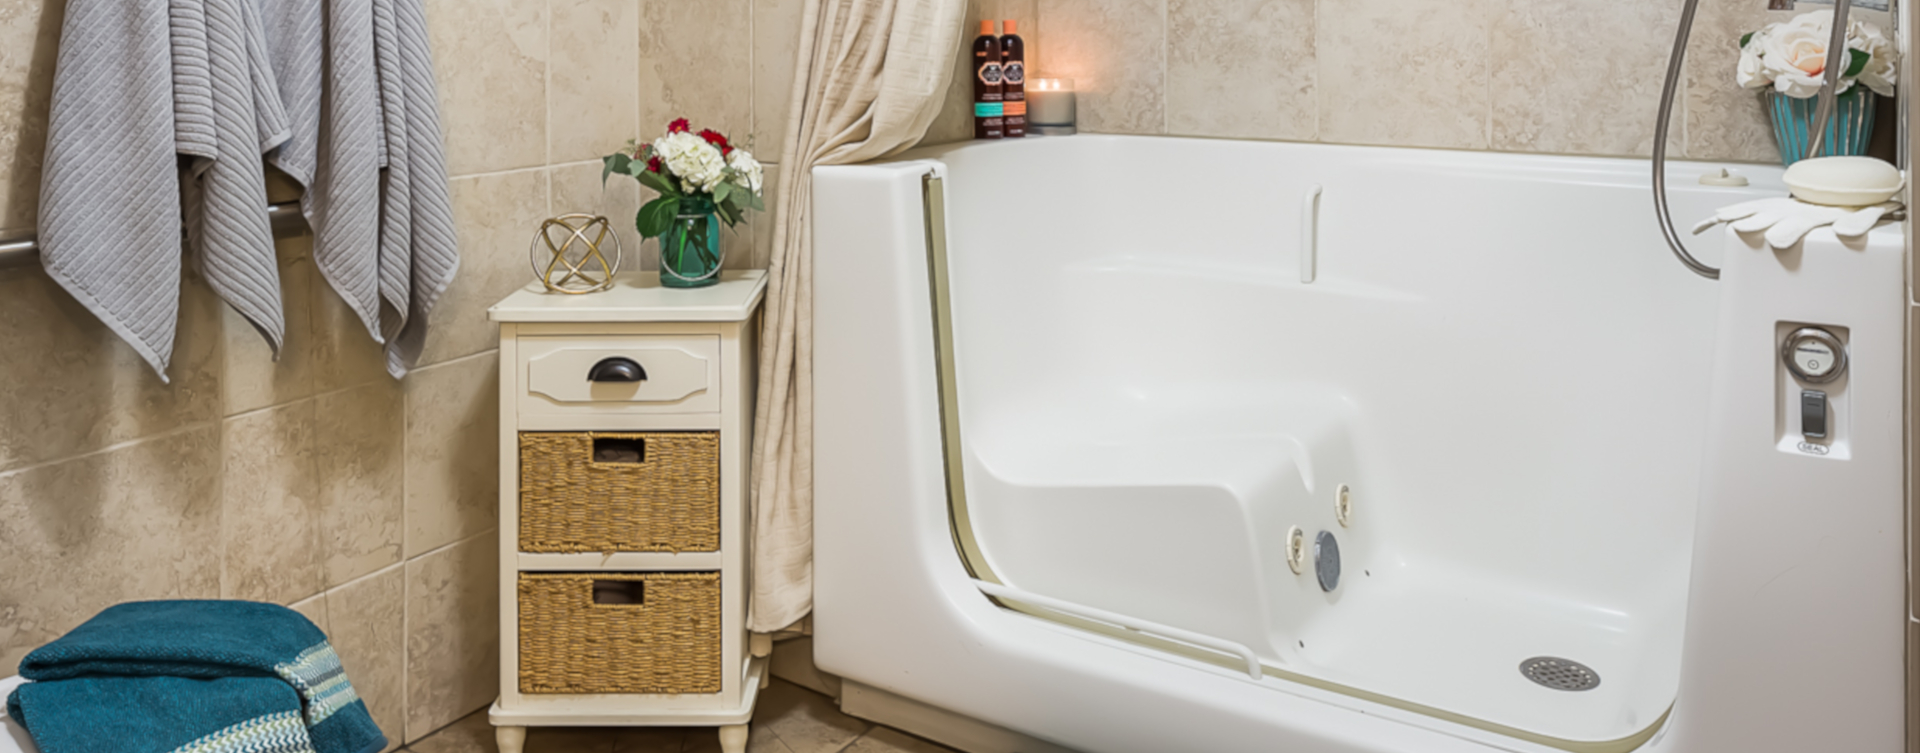 Our whirlpool bathtub creates a spa-like environment tailored to enhance your relaxation and enjoyment at Bickford of Urbandale